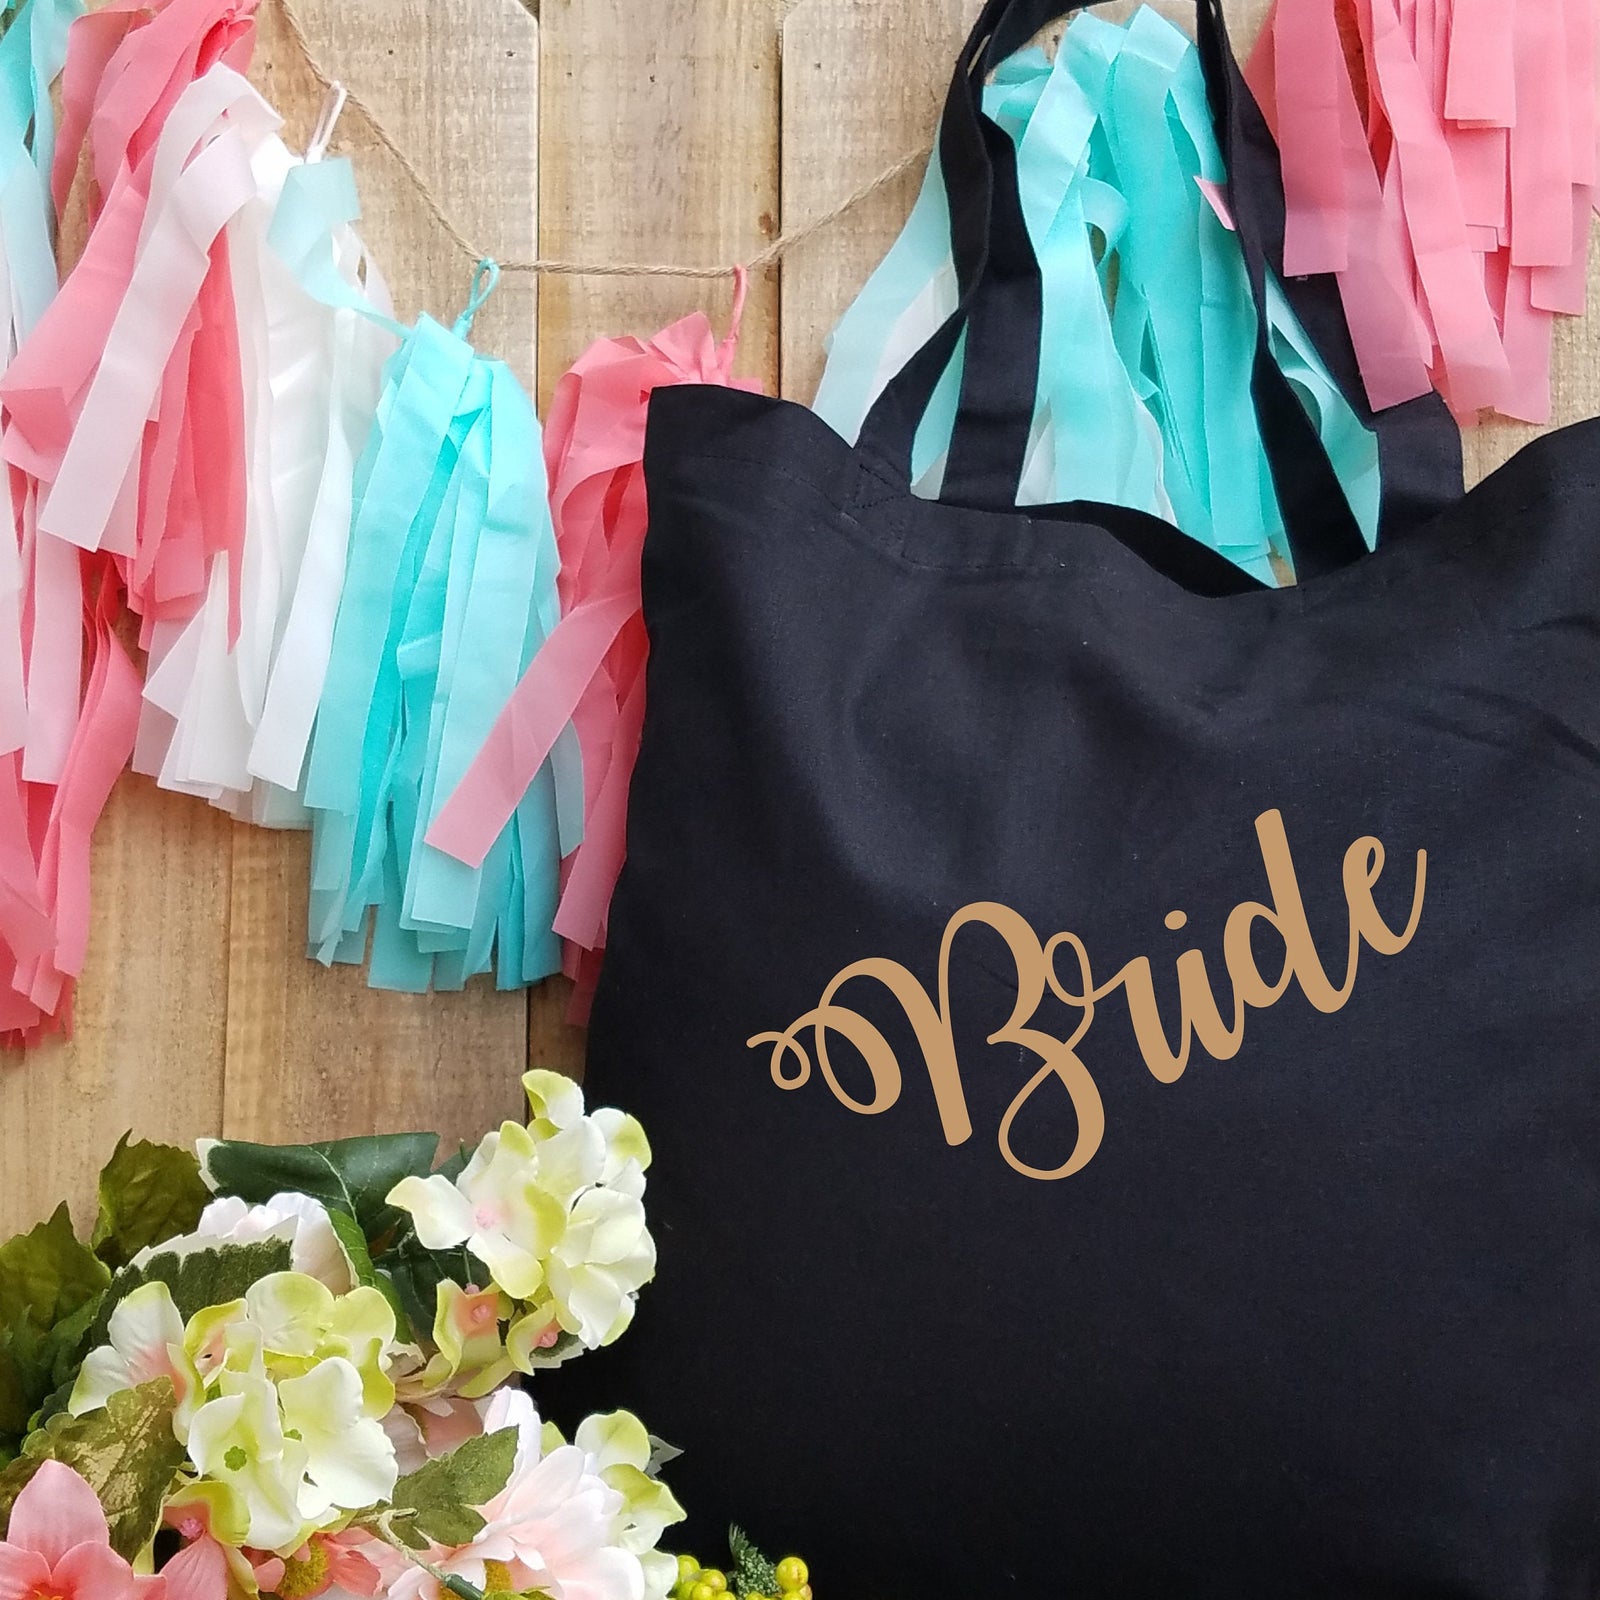 Bridal Party Tote Bag Personalized with Floral Monogram